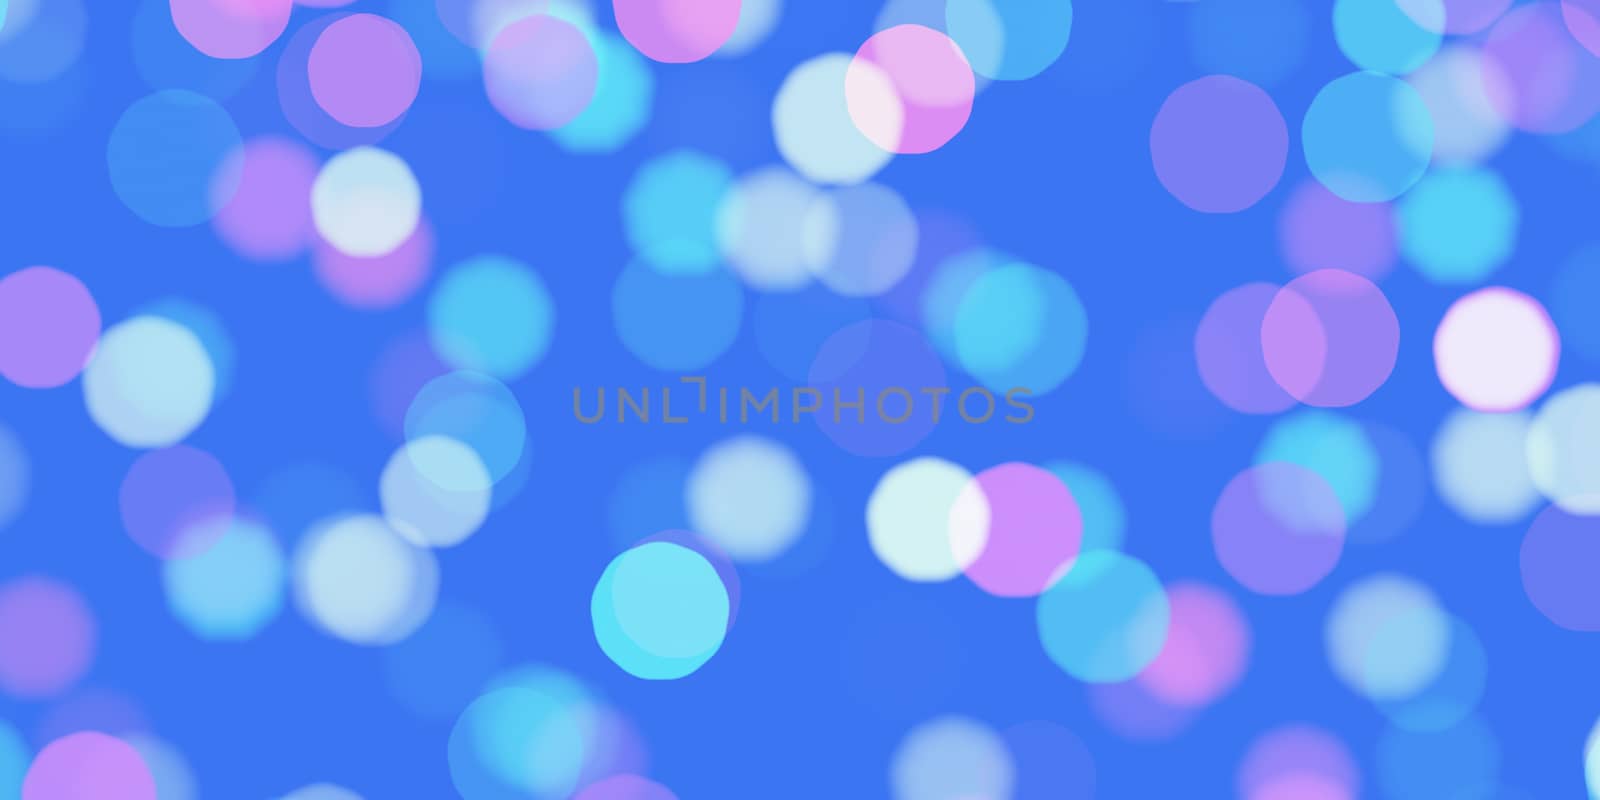 Sky Blue Bokeh Background. Shine Blurred Texture. Glowing Glitter Backdrop. by sanches812